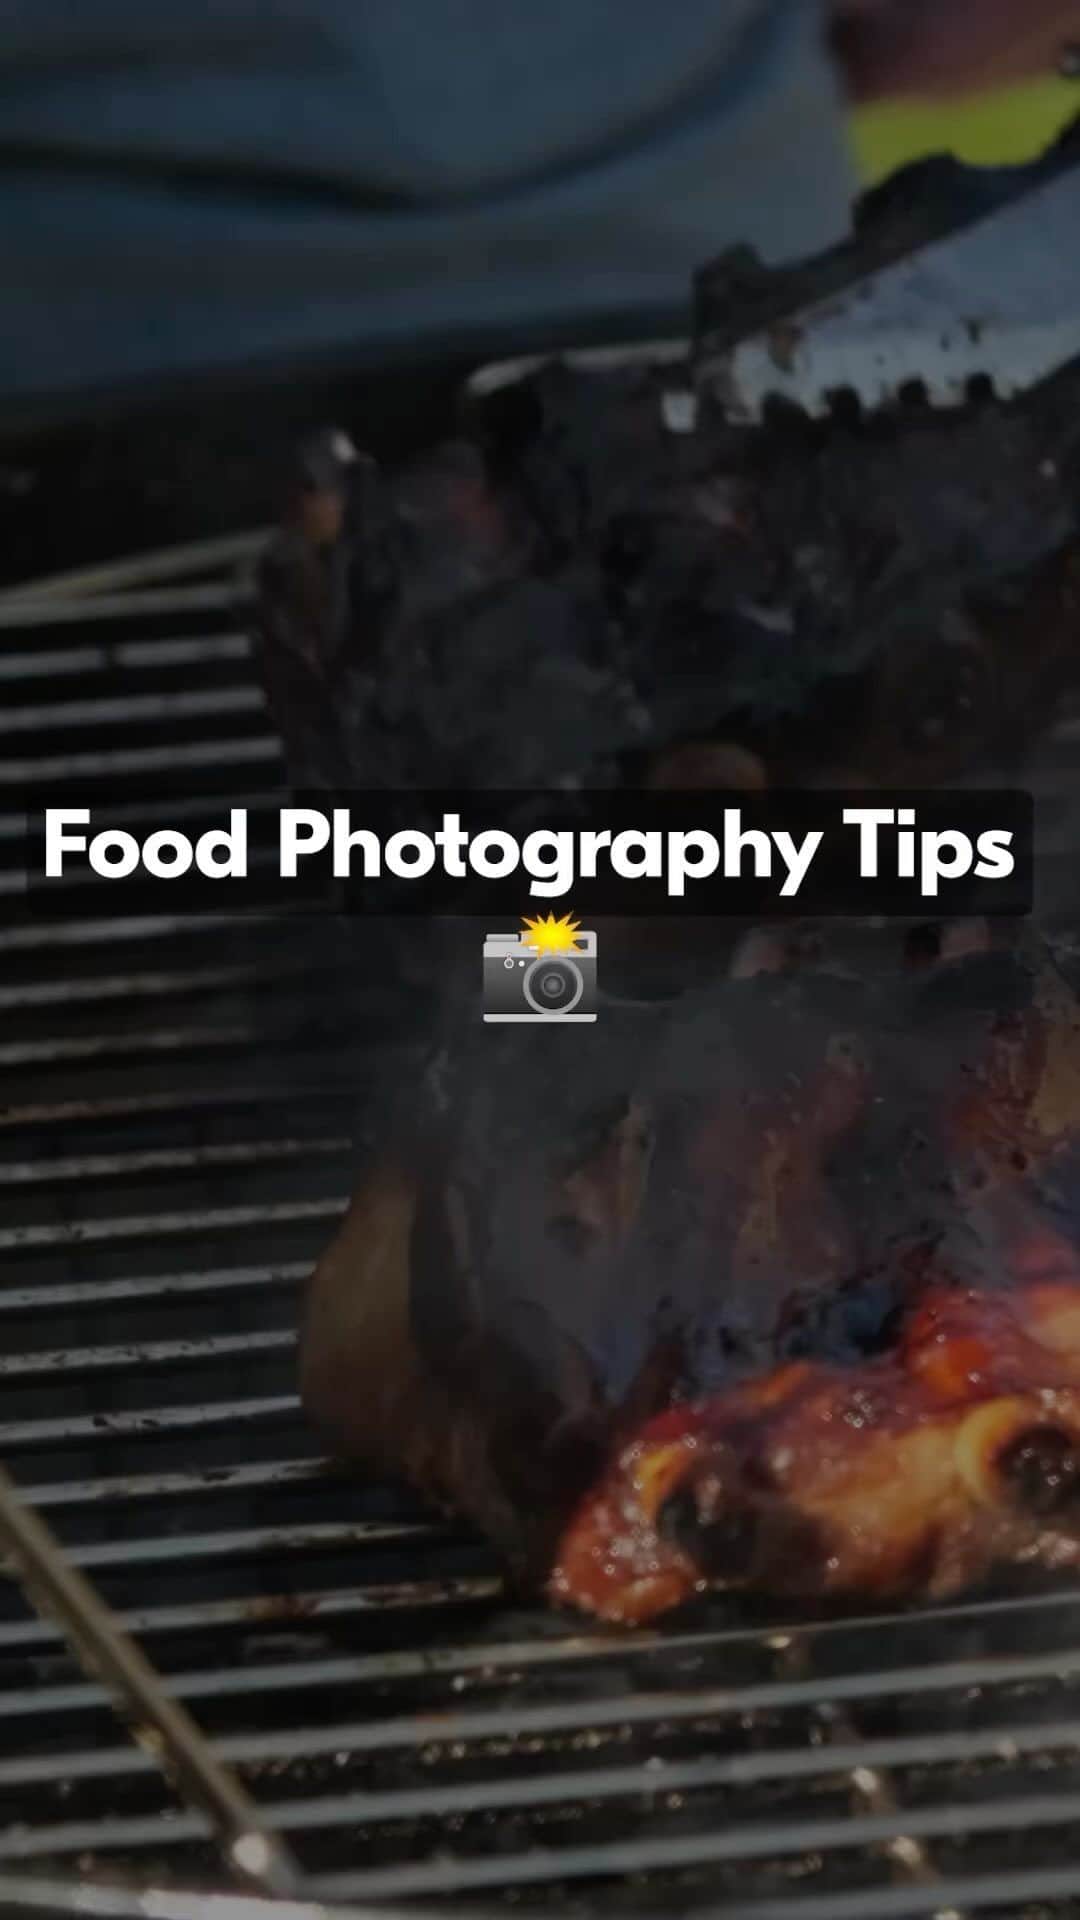 NikonUSAのインスタグラム：「@chef.jrob uses his Z 30 to capture all the food content this summer. What’s your tip for the best videos? #NikonCreators #NikonZ30 #vlogging #foodphotography #summer #BBQ #Z30」